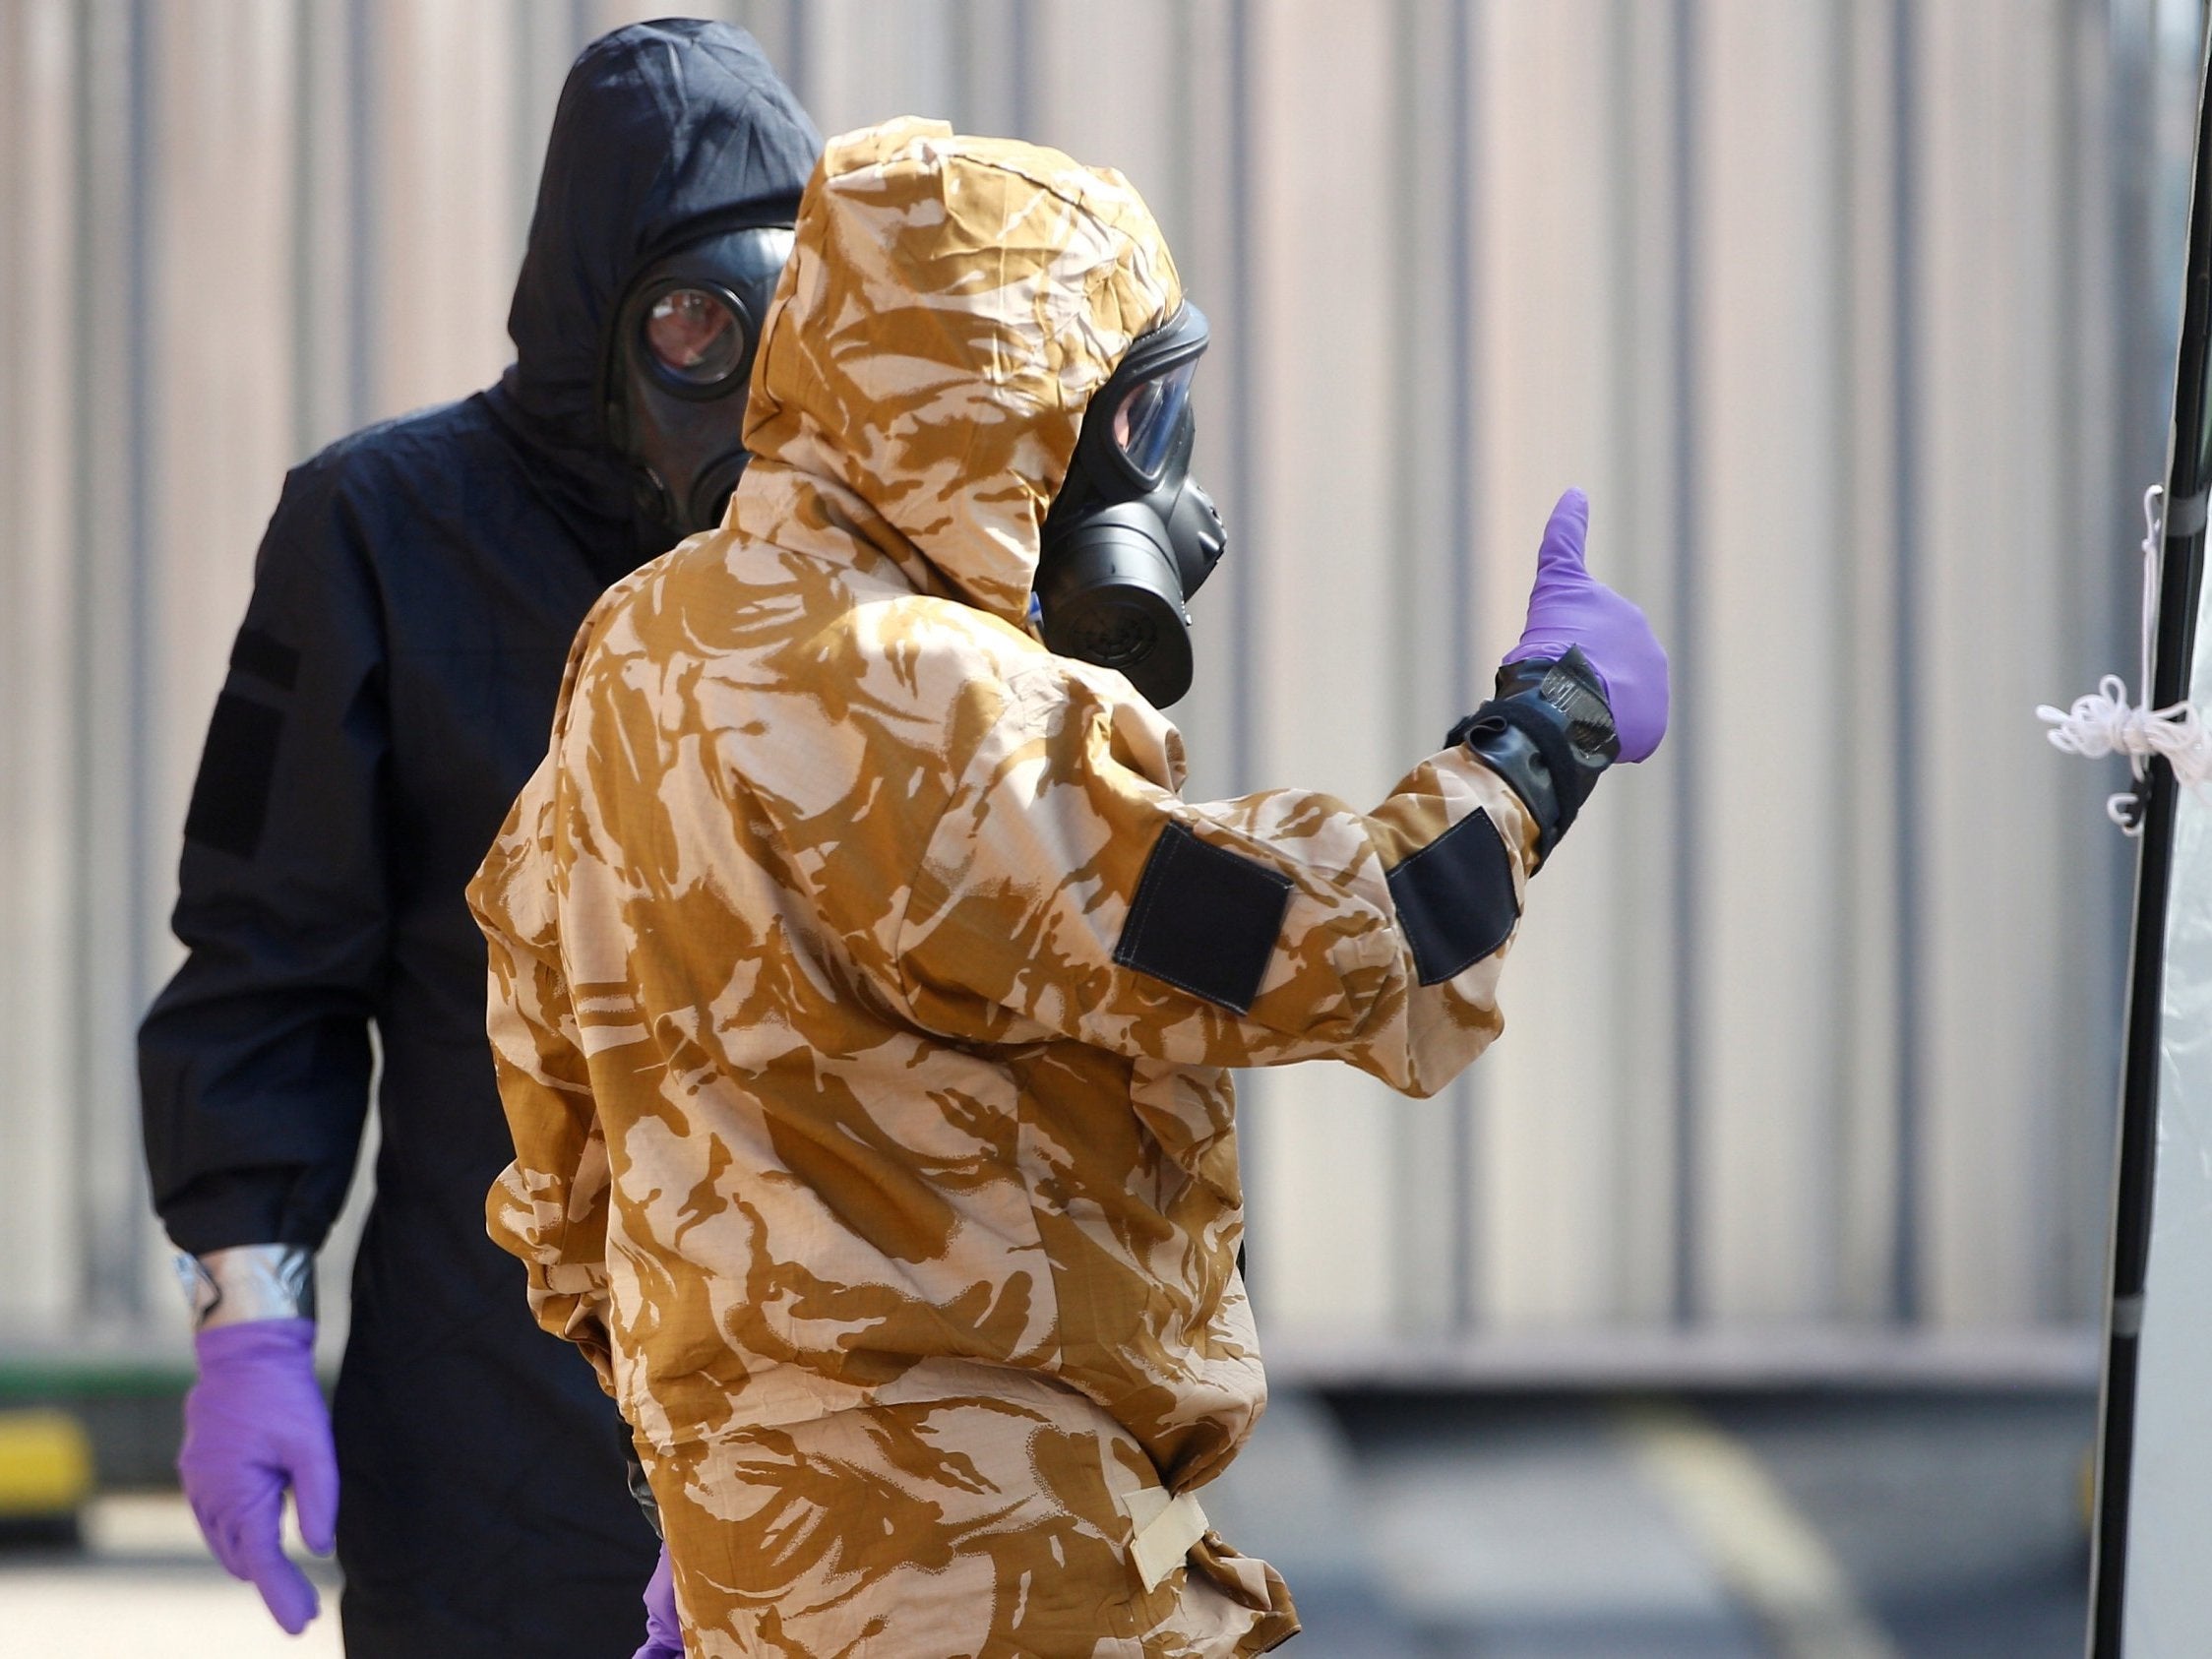 Forensic investigators, wearing protective suits, in Amesbury, 6 July (REUTERS)